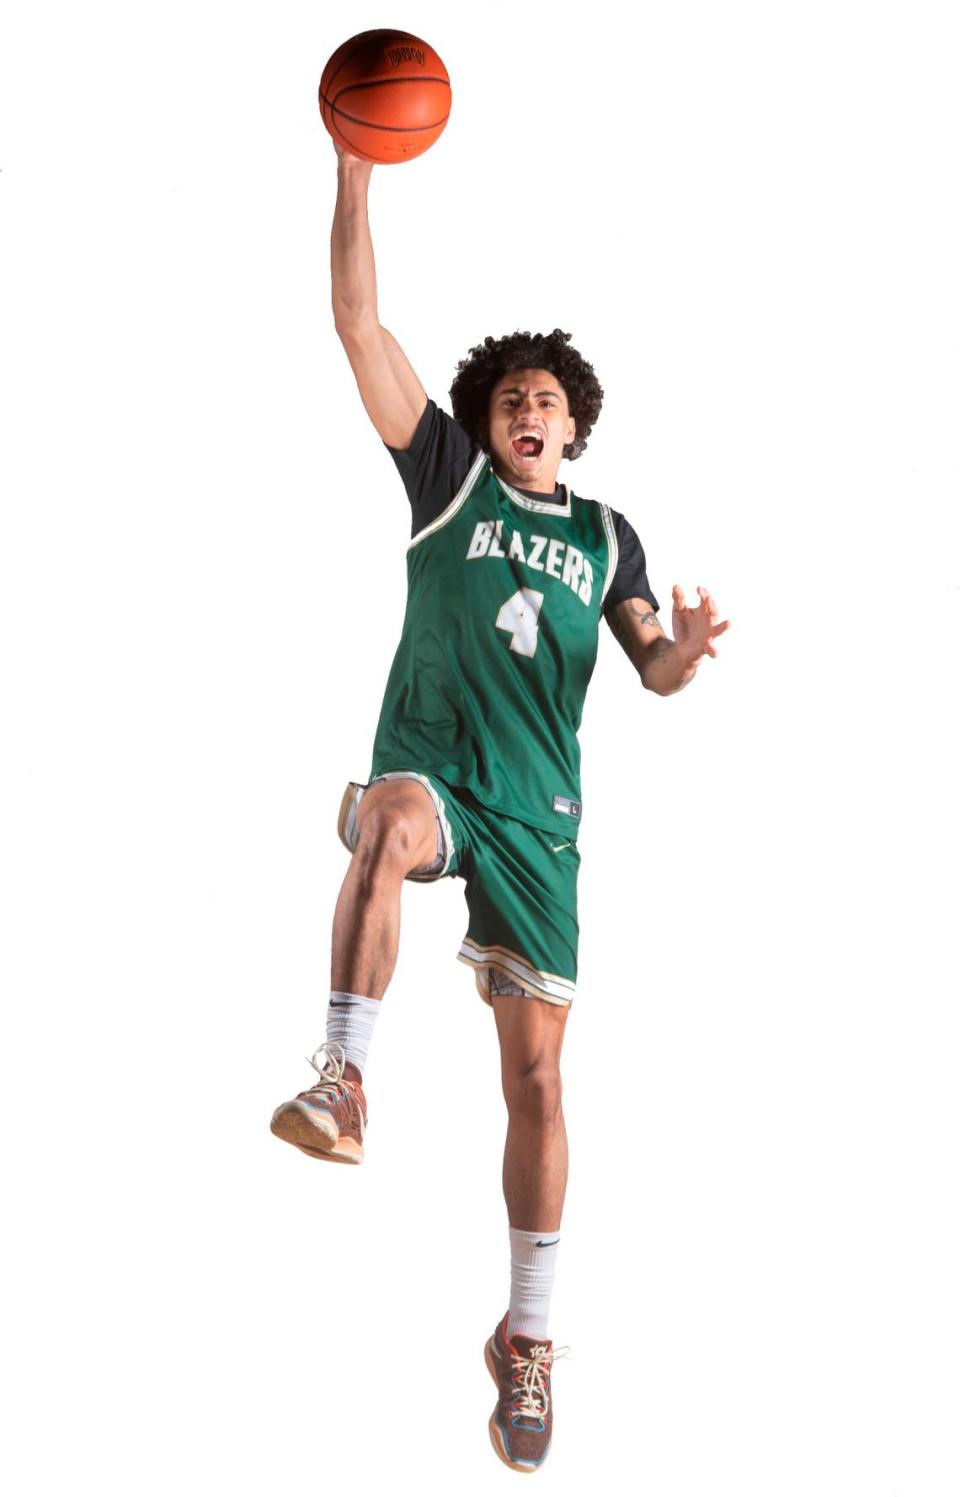 Timberline senior Brooklyn Hicks is one of six players named to The News Tribune’s All Area Boys Basketball Team. He is photographed at Curtis High School in University Place, Washington, on Saturday, March 11, 2023.